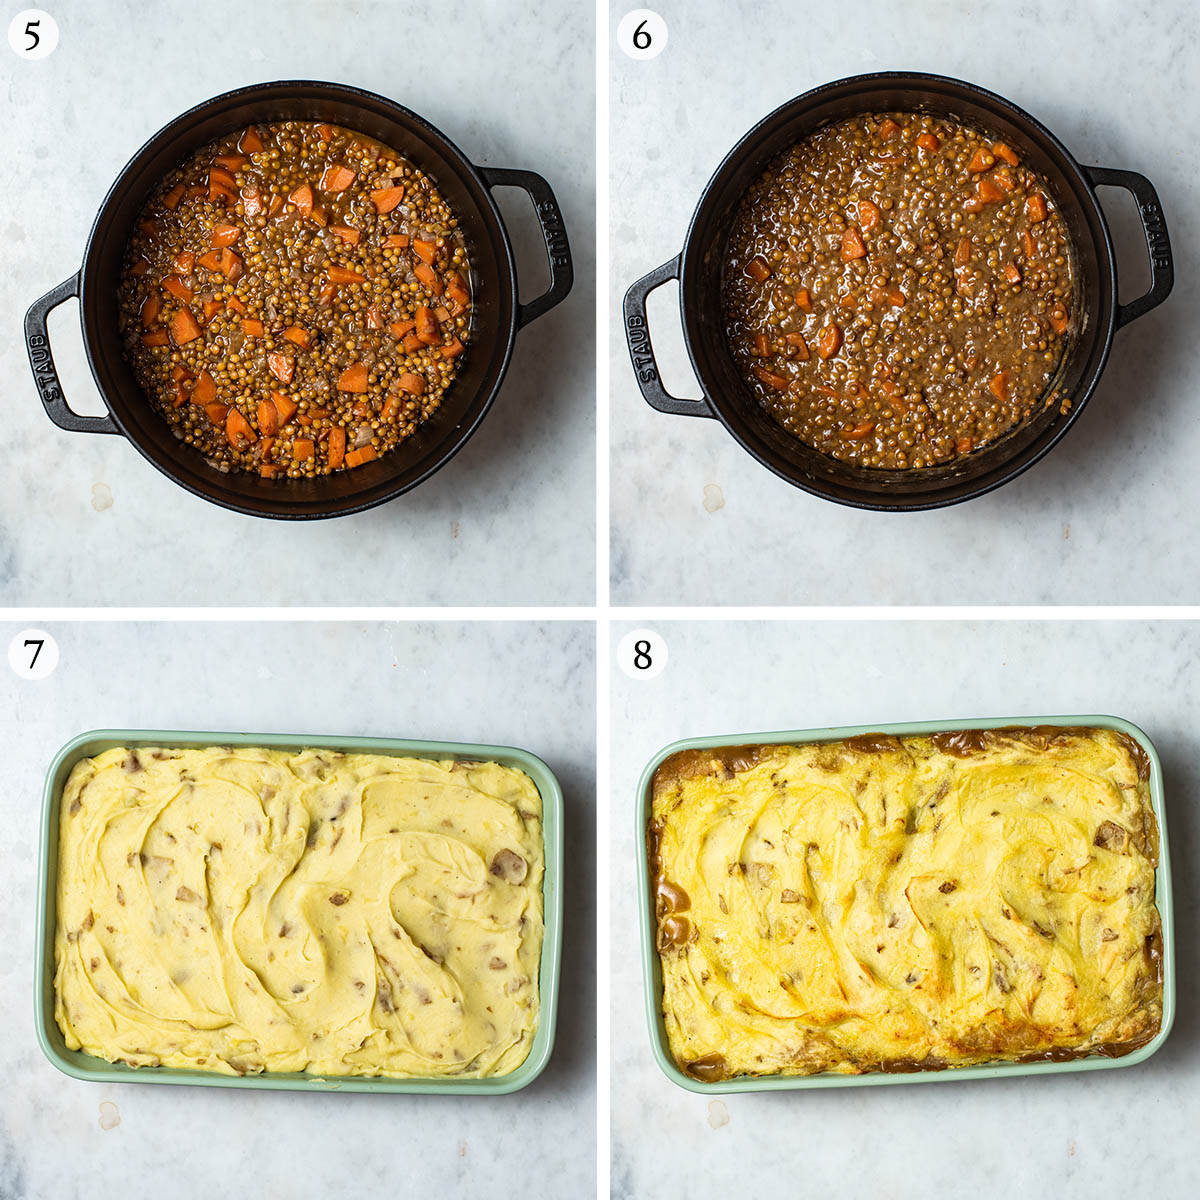 Cottage pie steps 5 to 8, thickening filling and topping and baking pie.